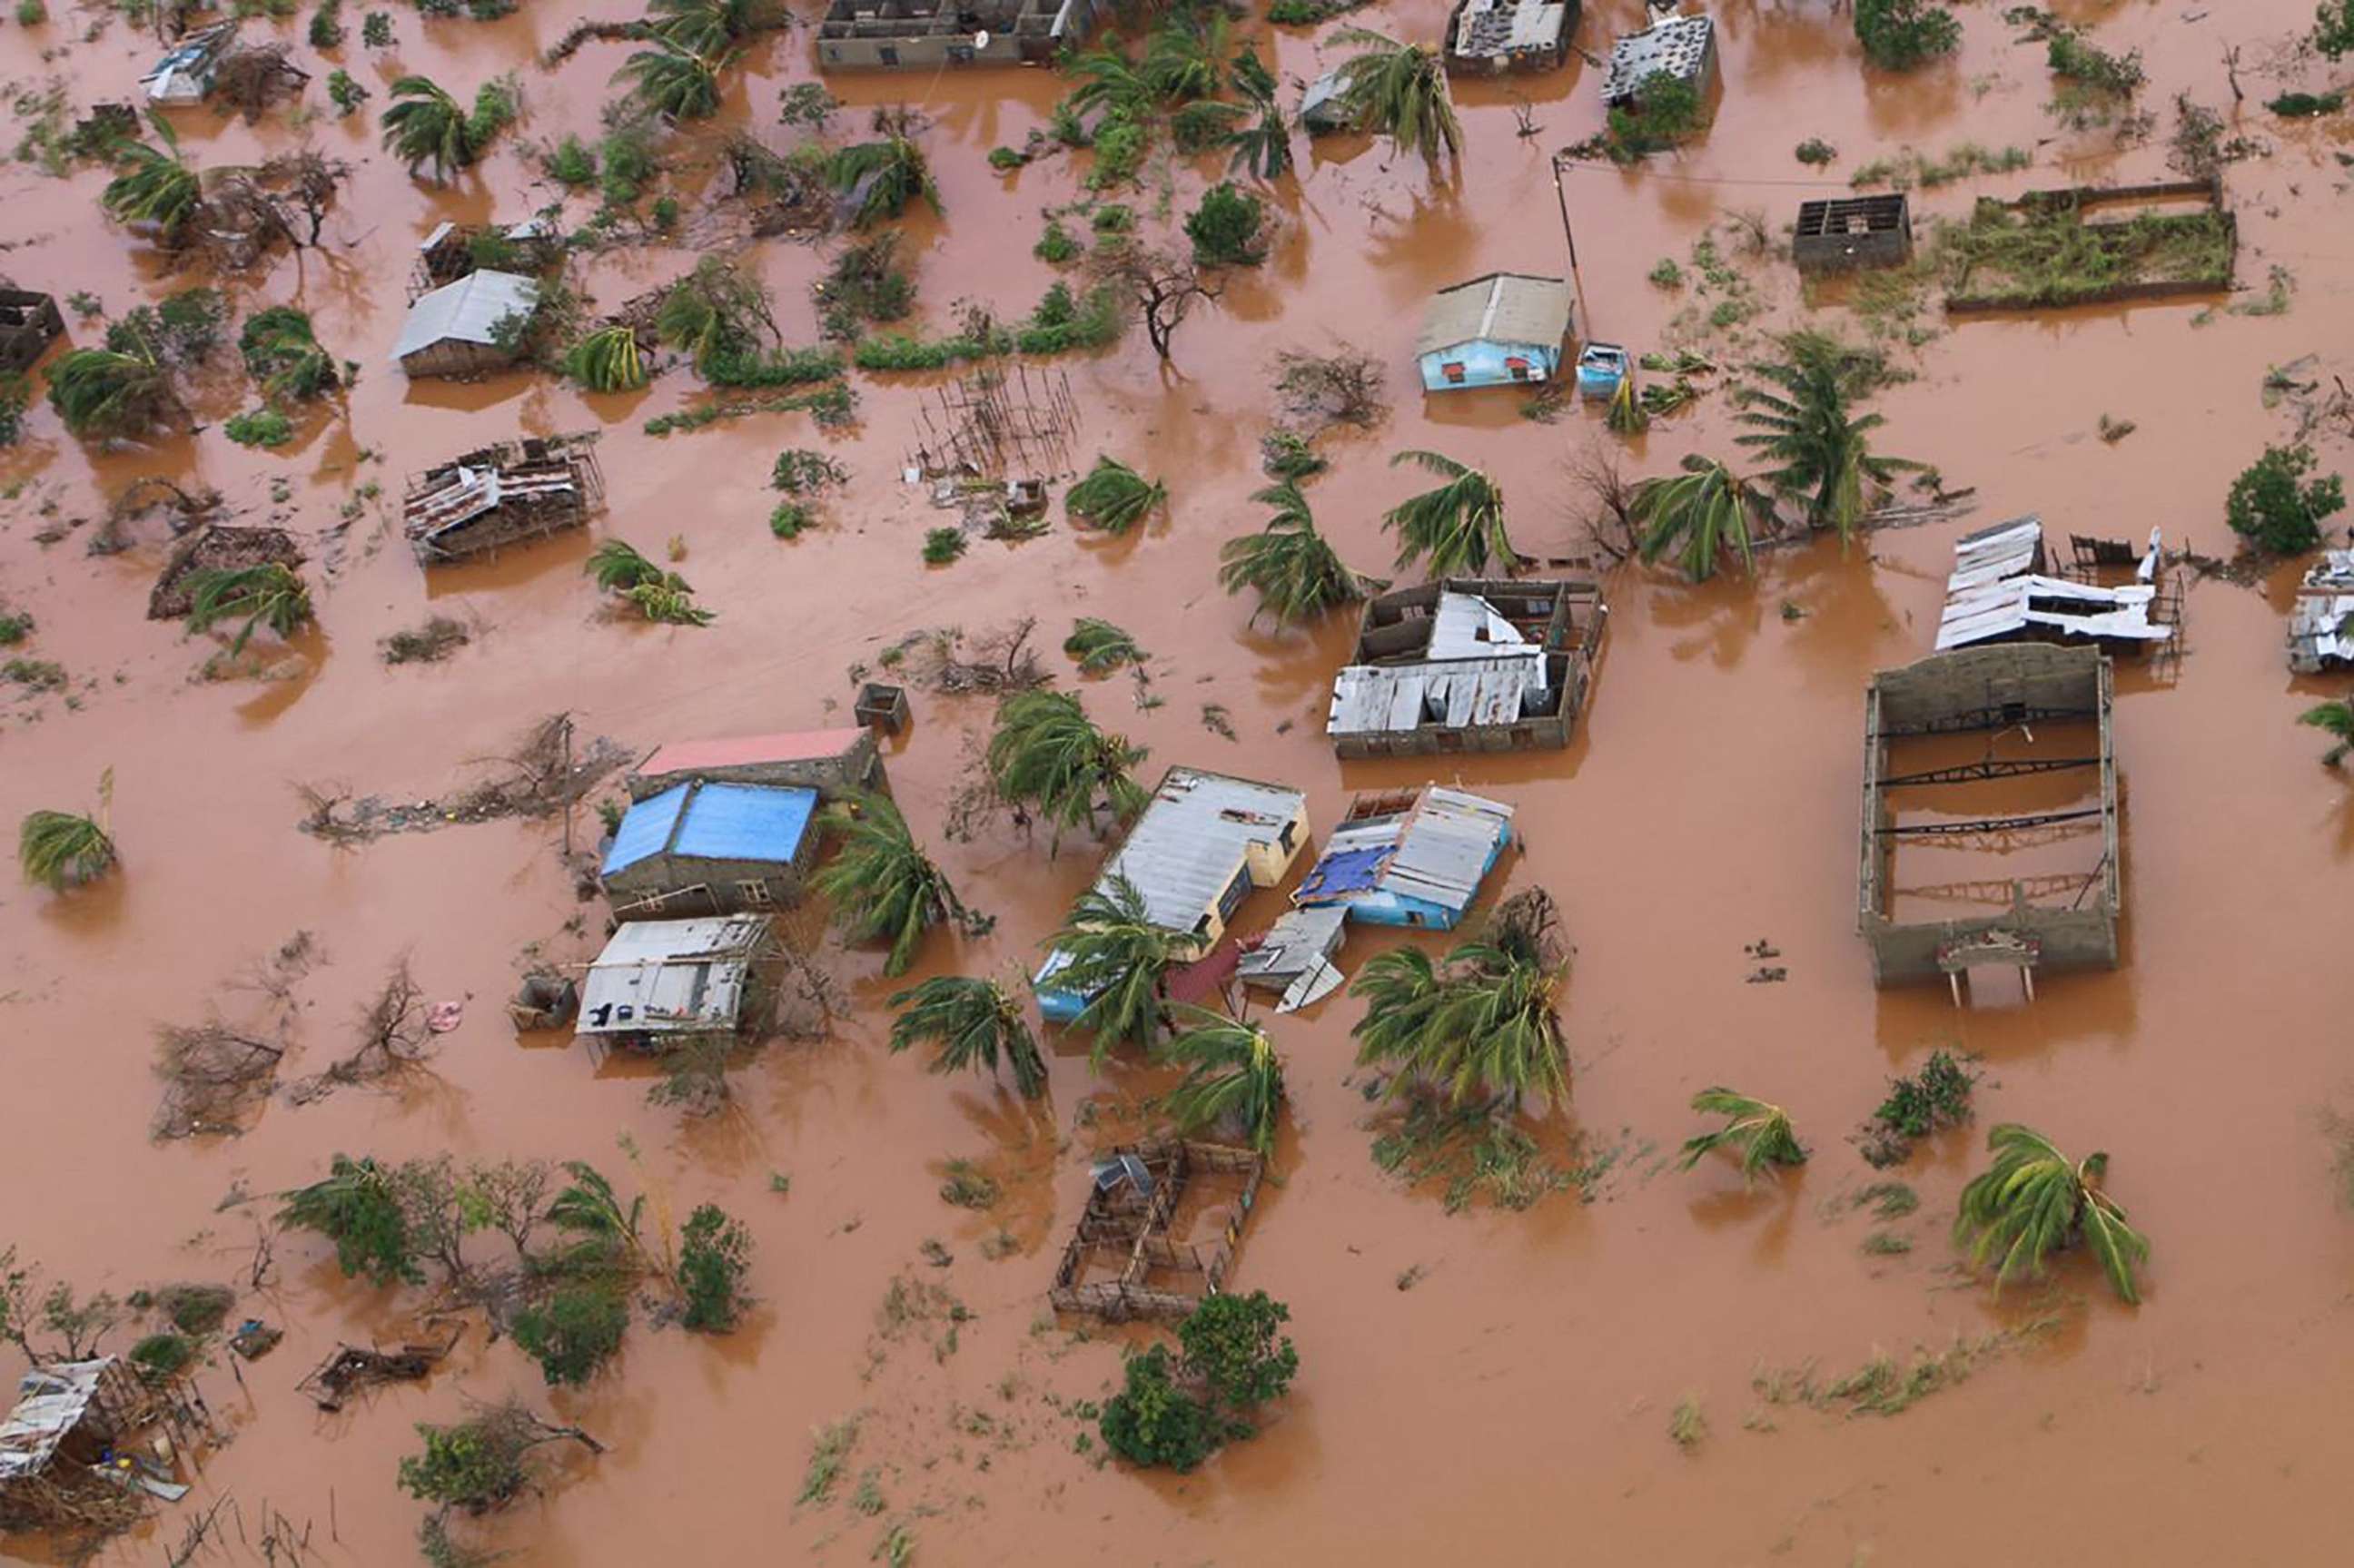 PHOTO: A picture shows houses in a flooded area of Buzi, central Mozambique, March 20, 2019, after the passage of cyclone Idai.